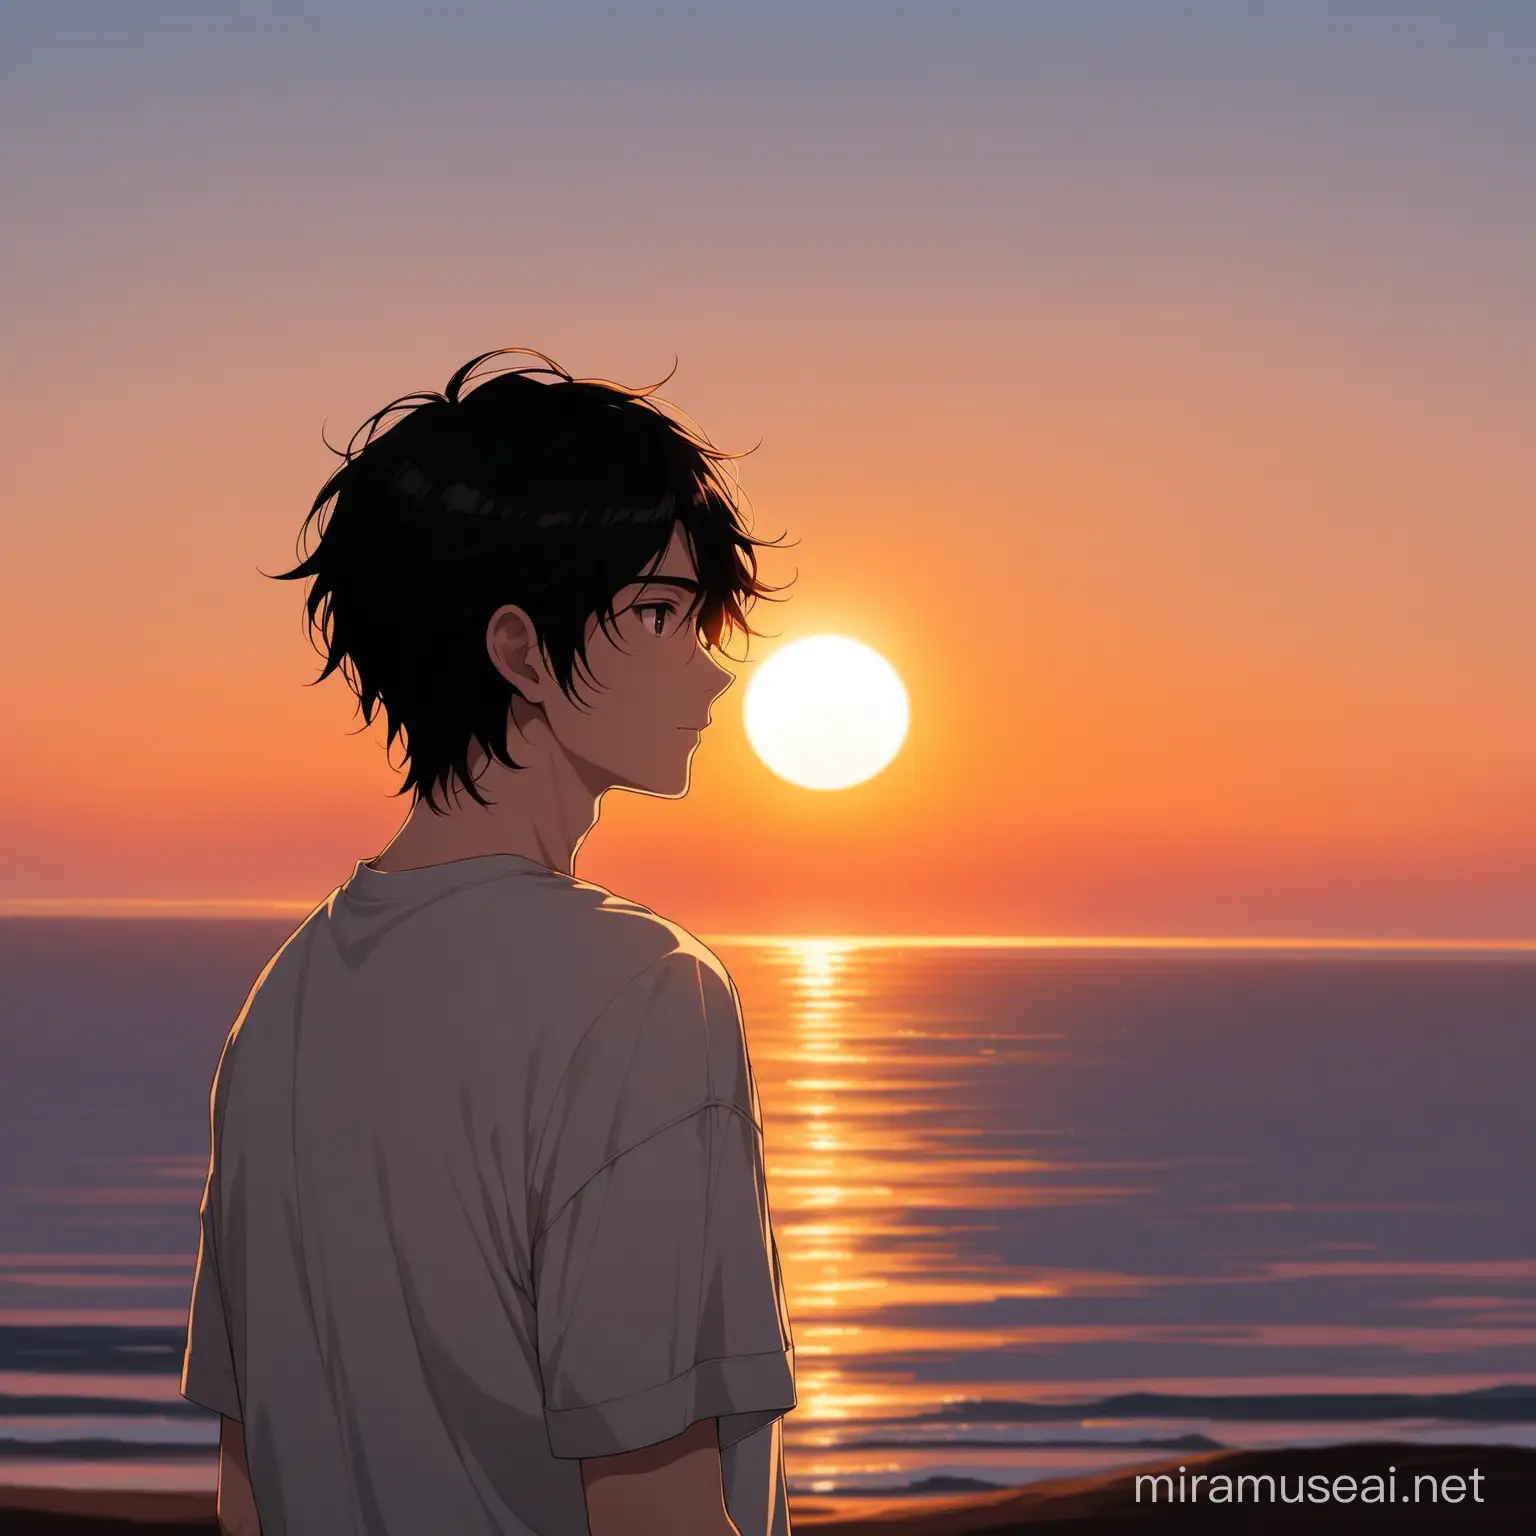 Contemplative Young Man Admiring Sunset with Visible Heart